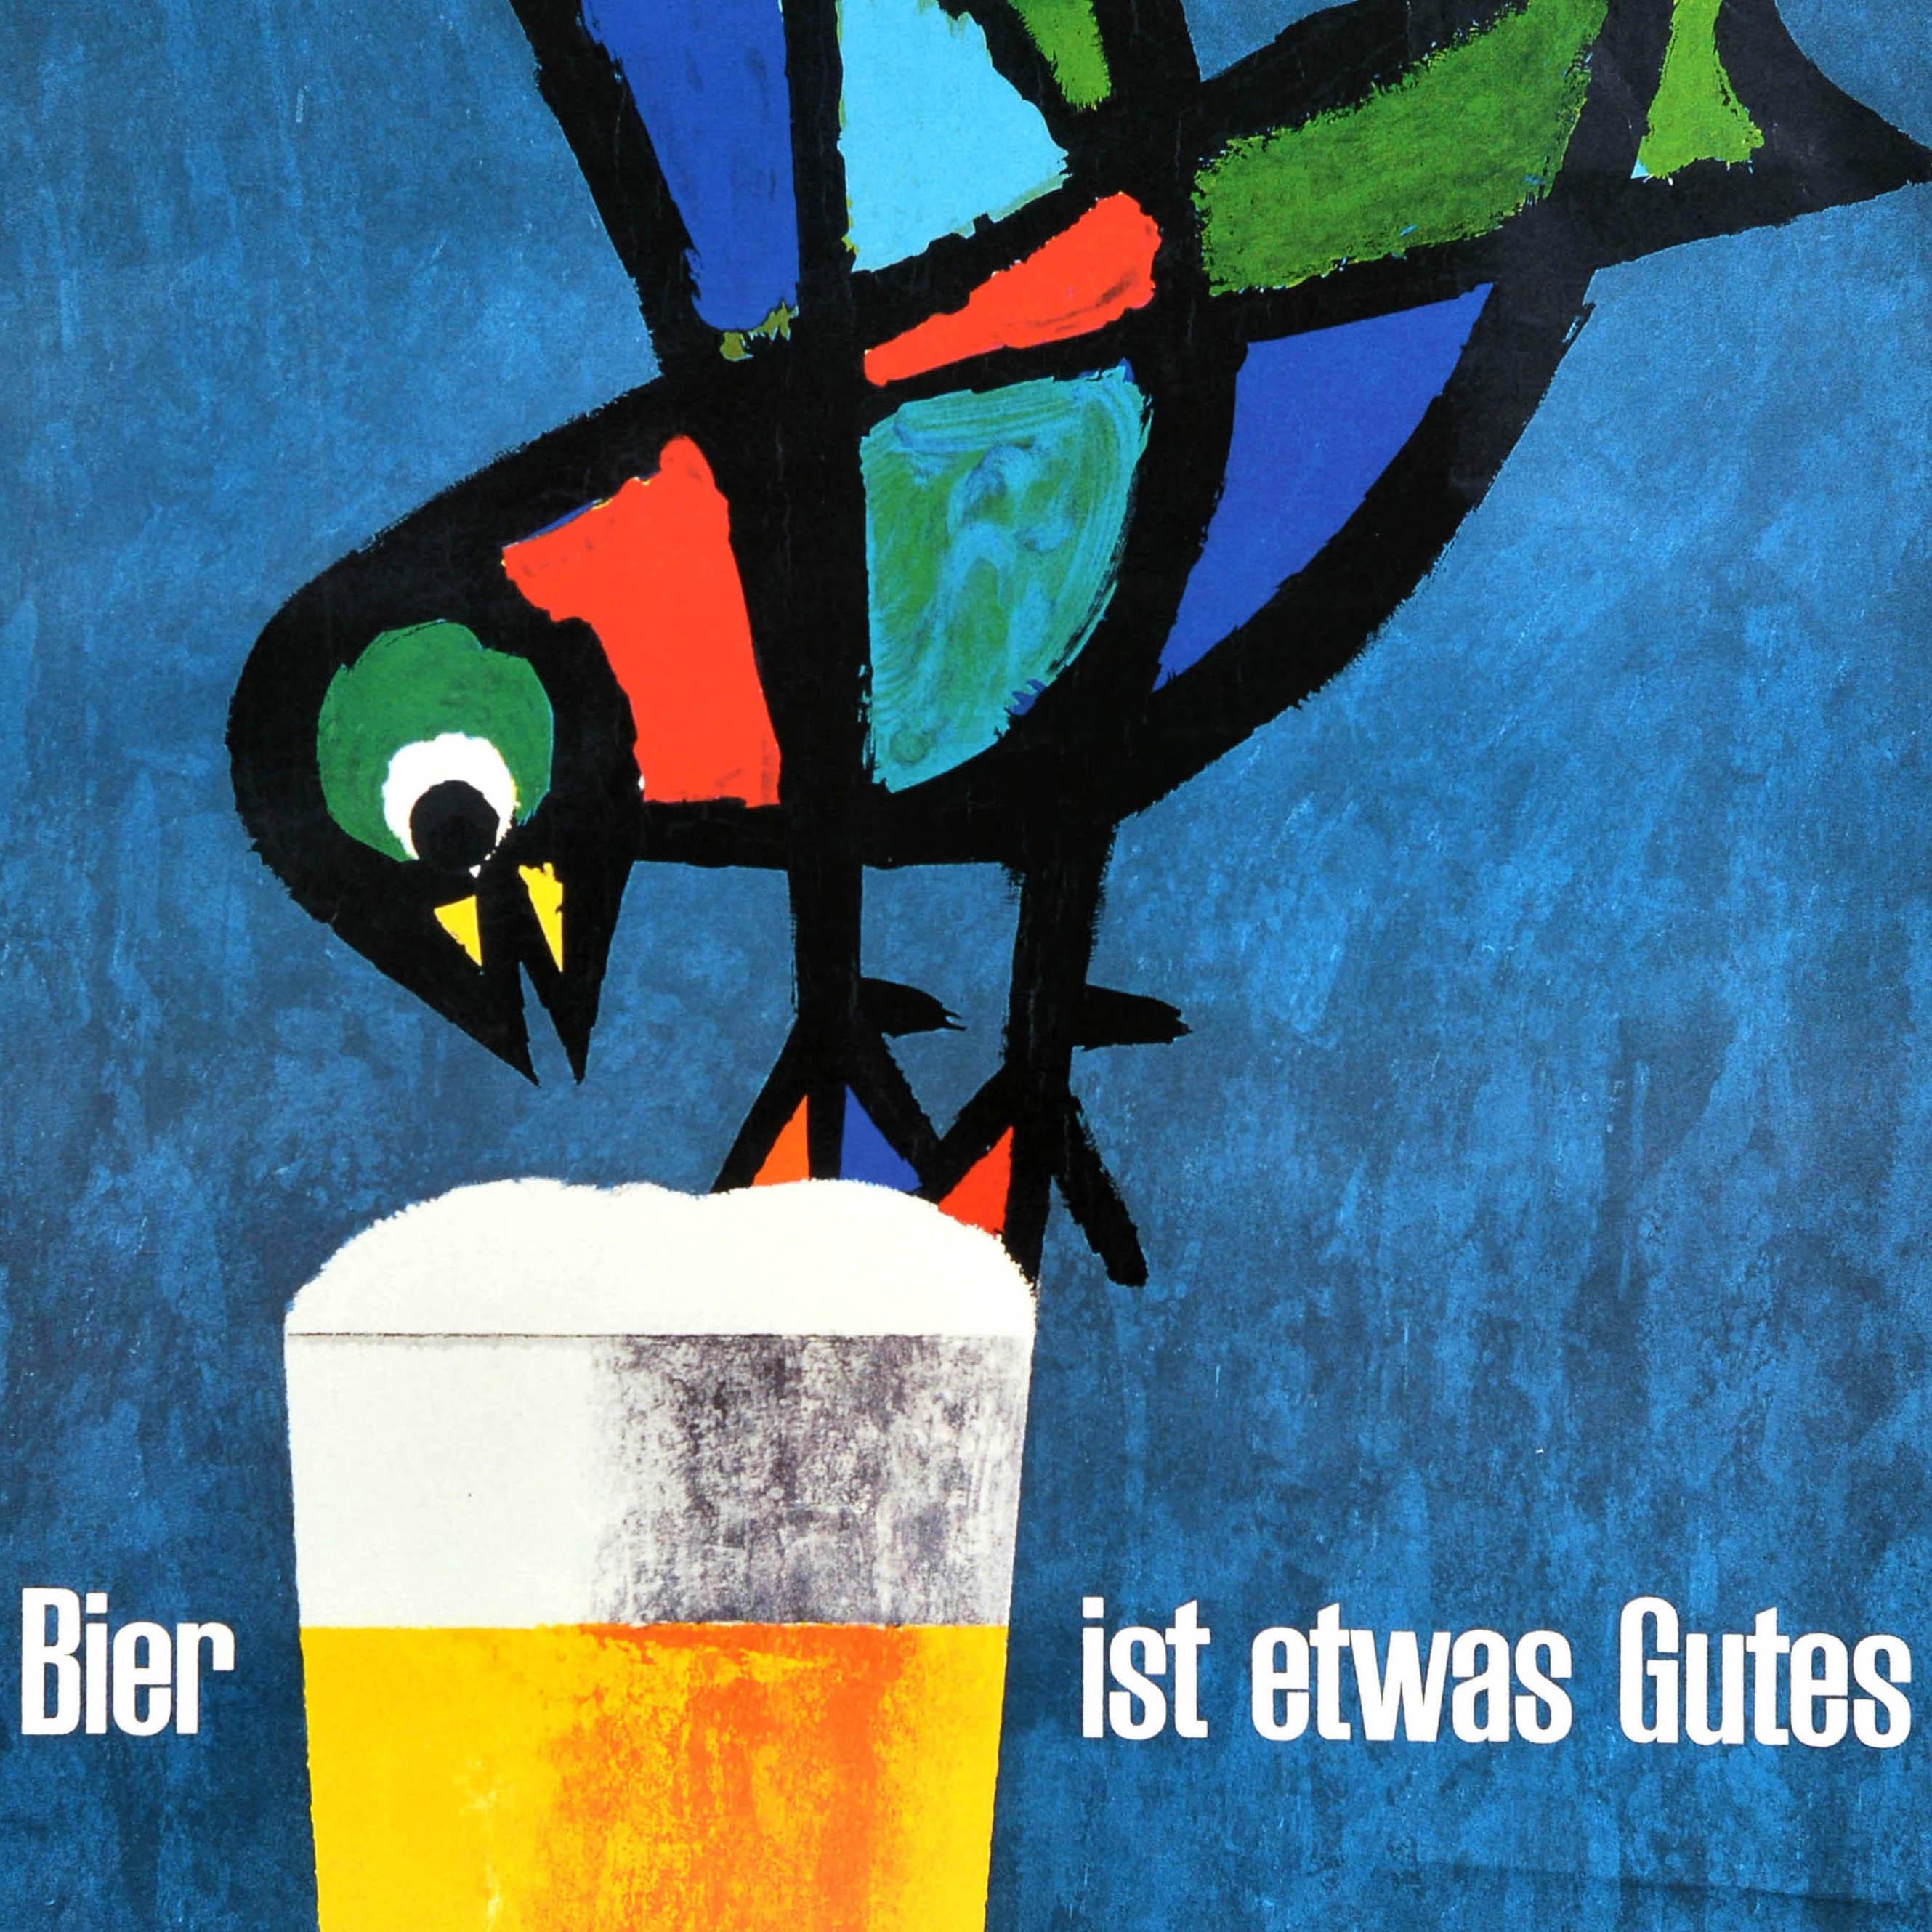 Original vintage drink advertising poster - Bier ist etwas Gutes / Beer is a good thing - featuring a fun illustration by the Swiss graphic artist Celestino Piatti (1922-2007) depicting a colourful bird on a glass of beer set on a blue background.